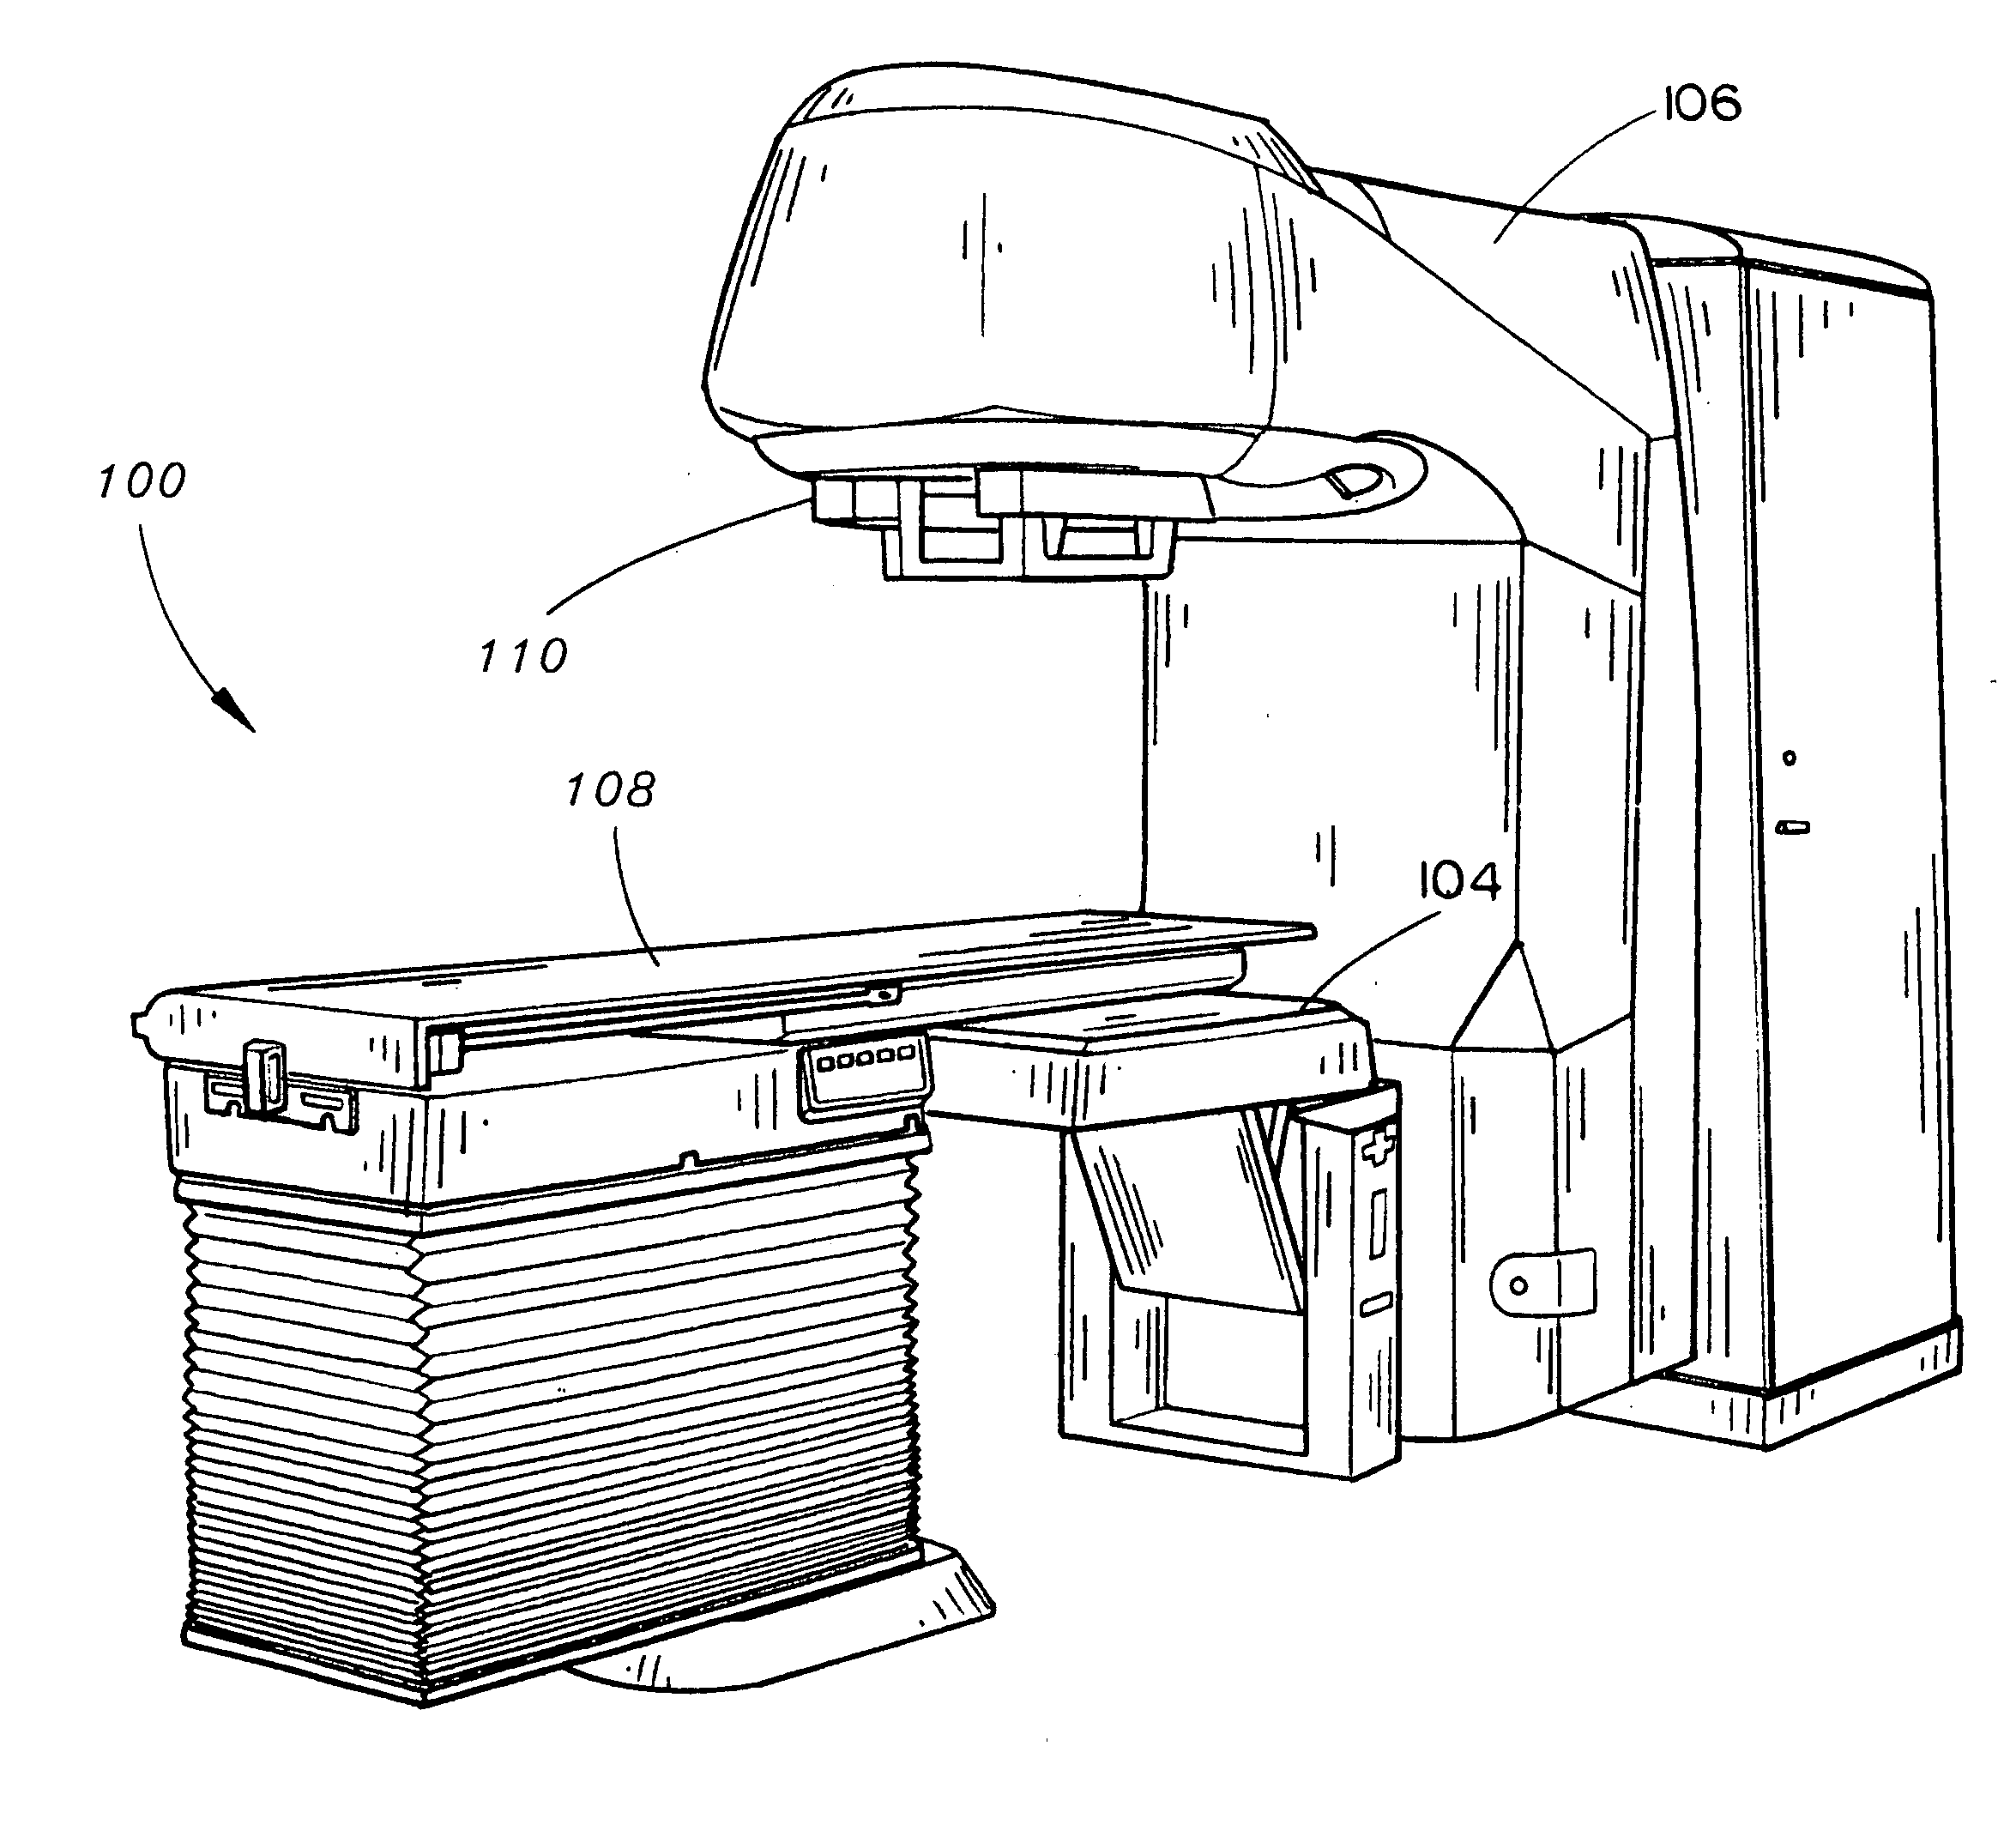 Multi-leaf collimator based field size clipping for automatic adaptation to allowed image area